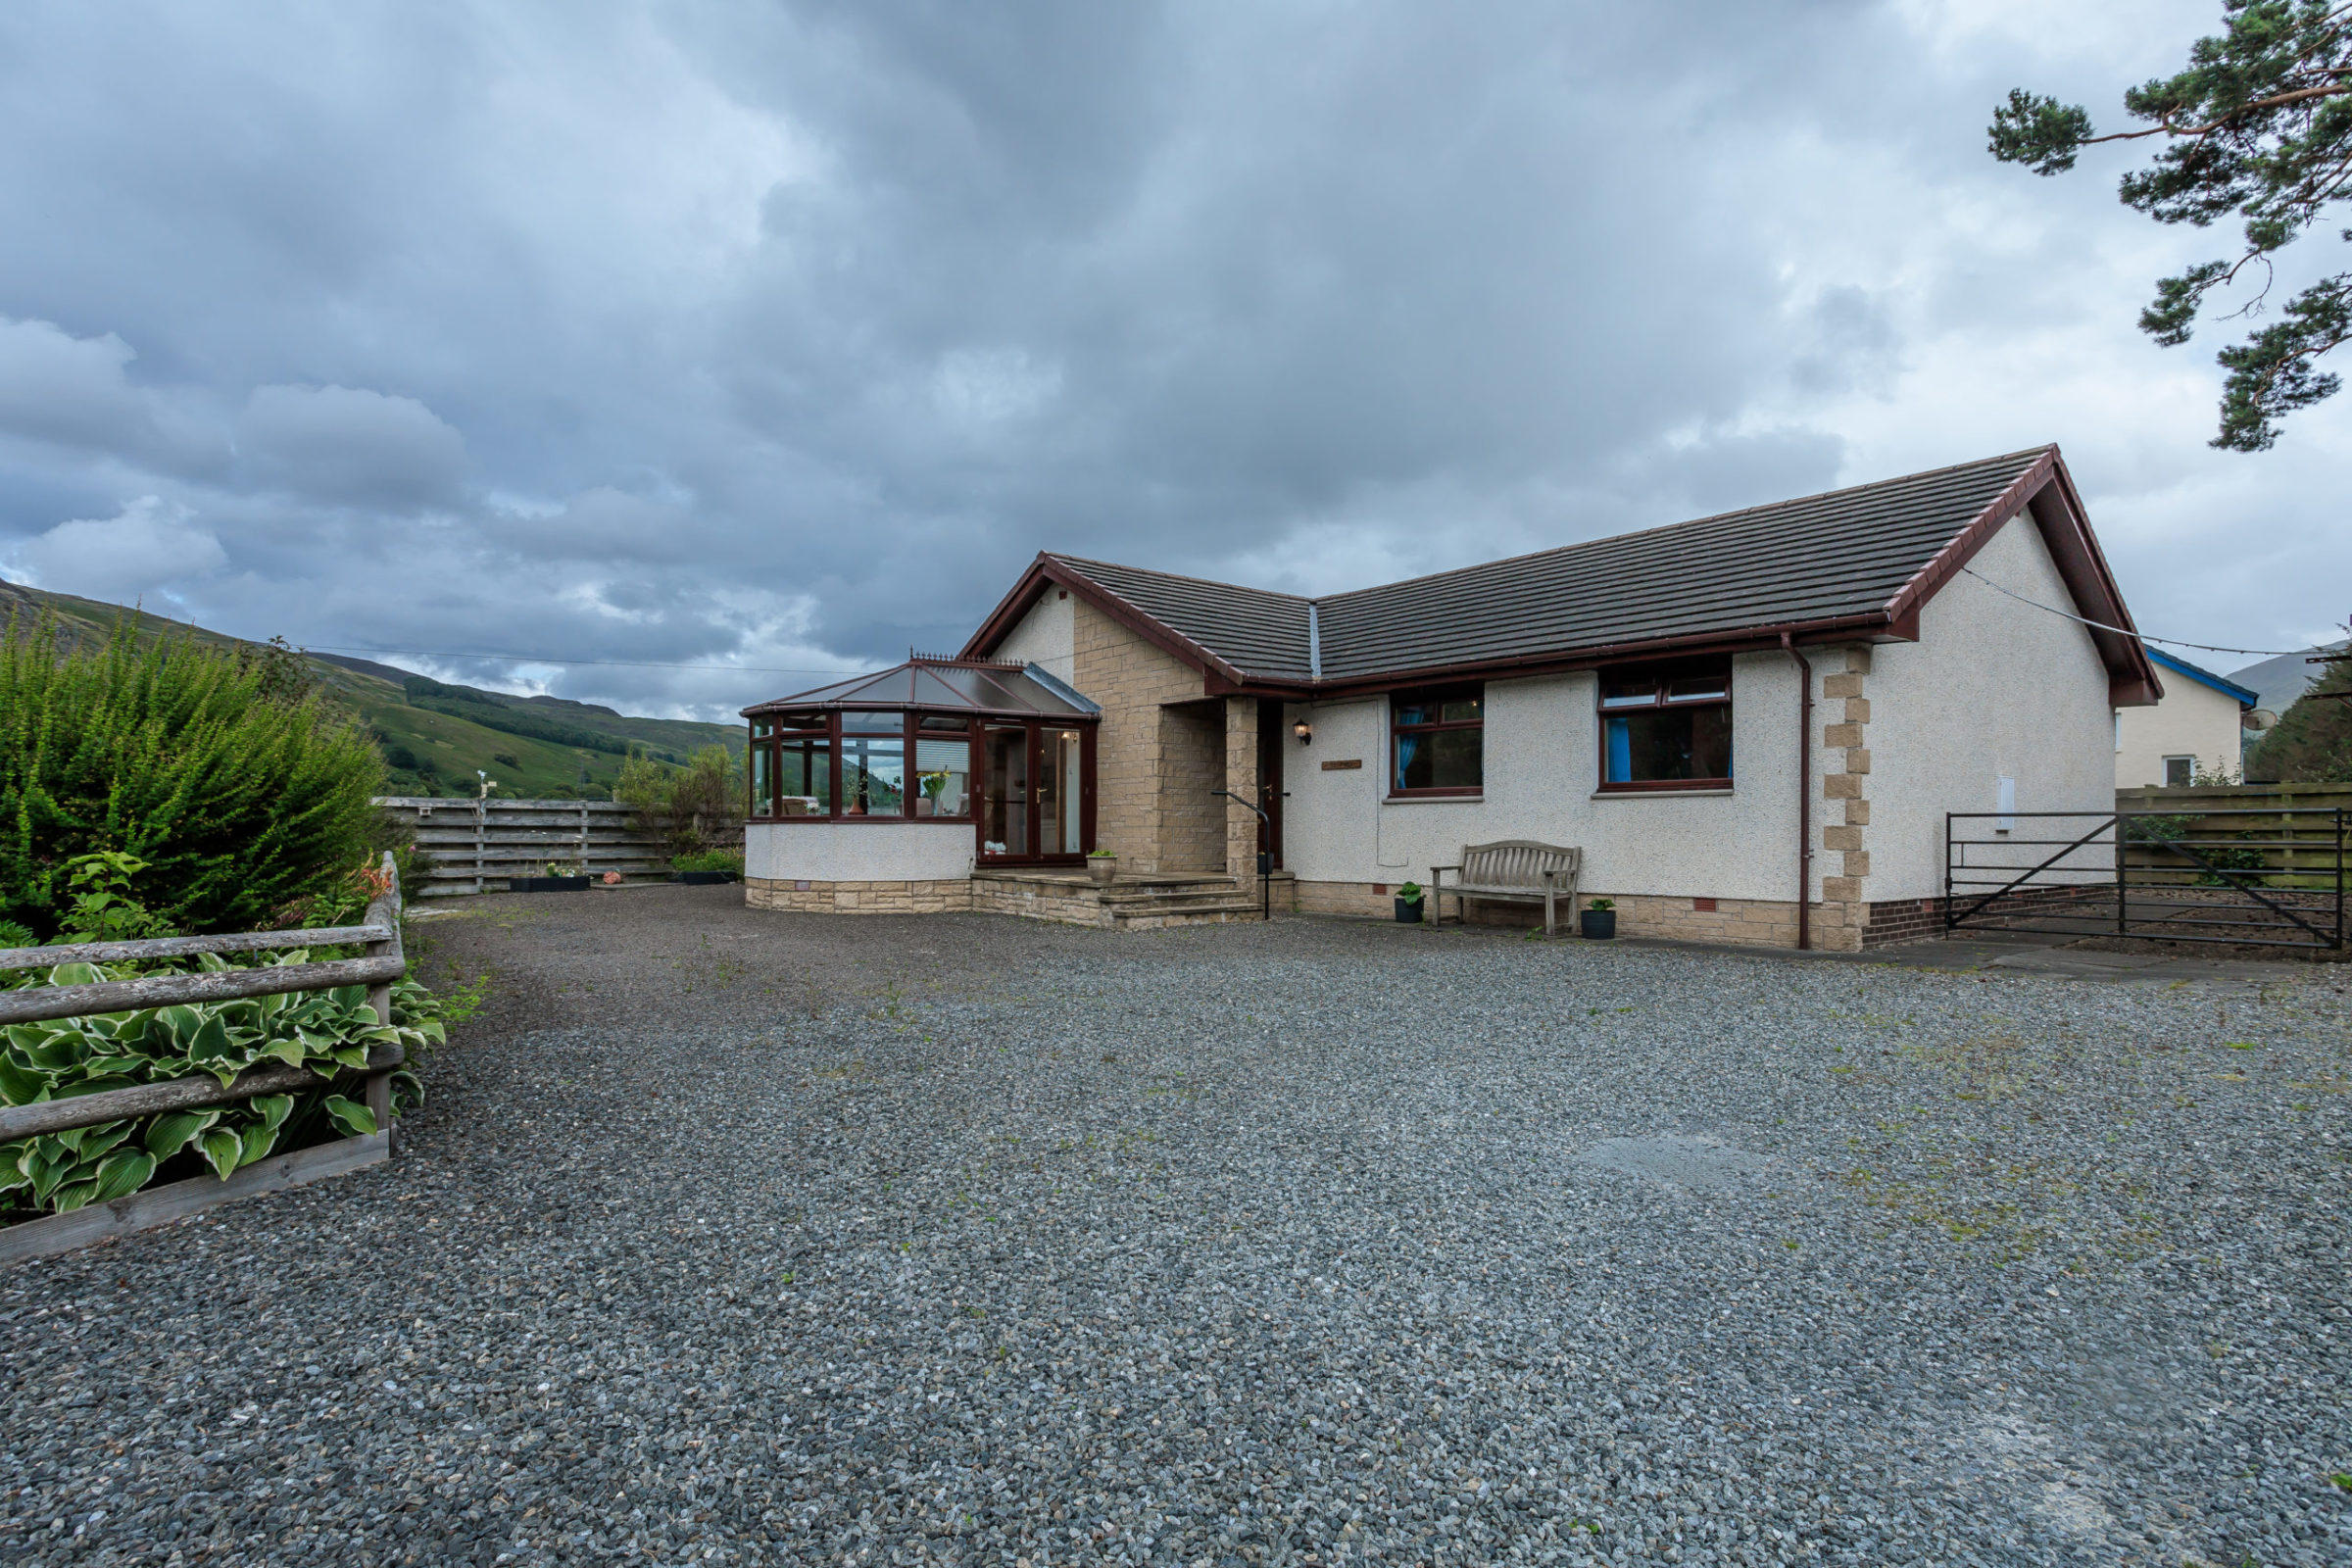 3 Bed Detached Bungalow – The Pines, Muirlodge Place, Kinloch Rannoch, Pitlochry PH16 5PY